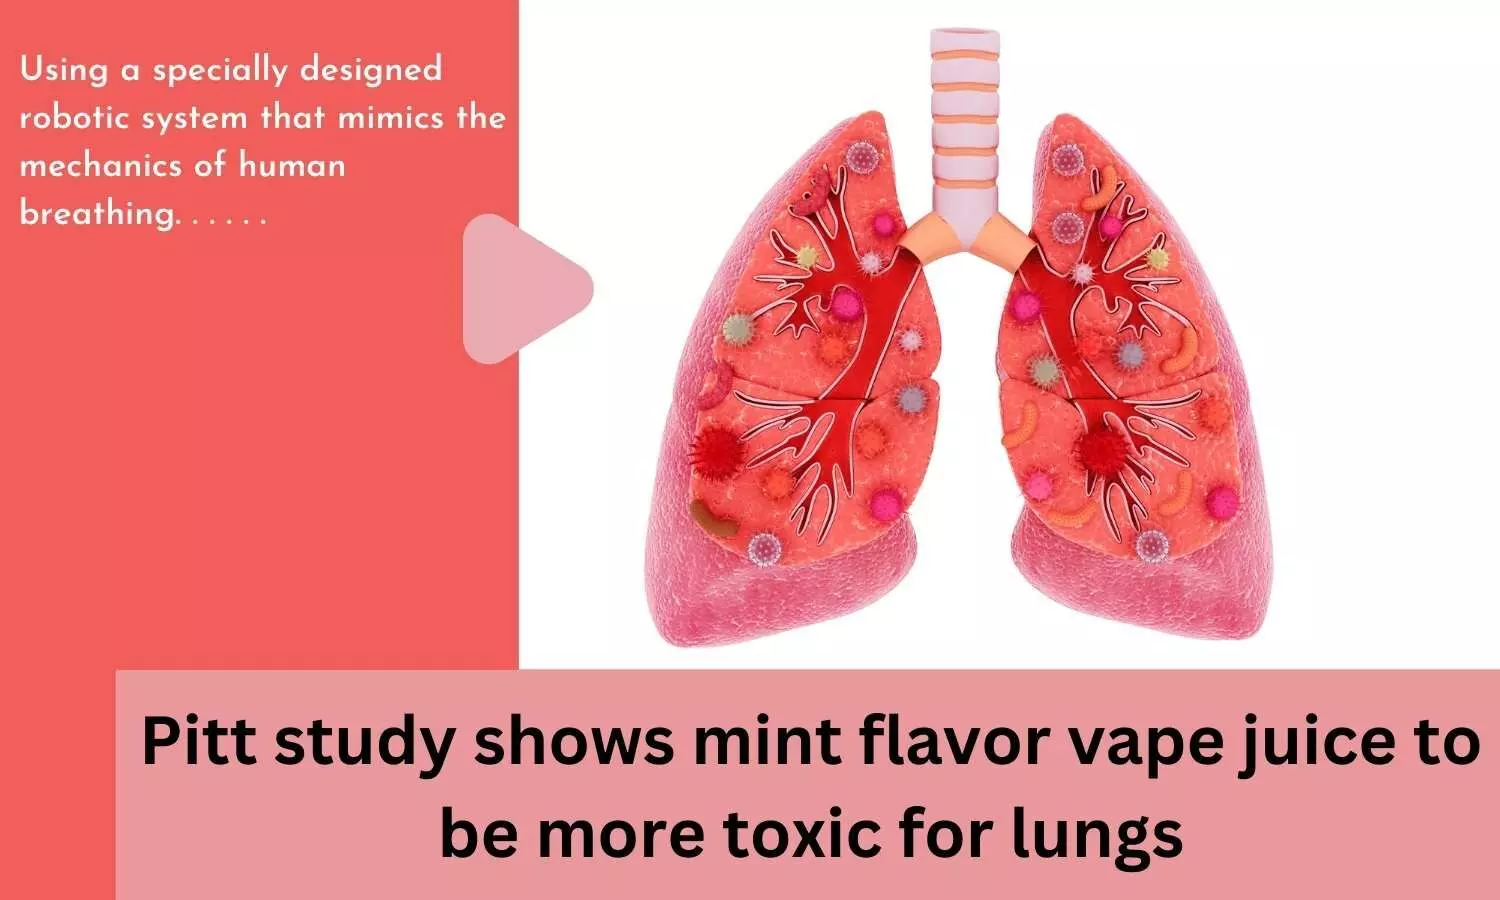 Pitt study shows mint flavor vape juice to be more toxic for lungs